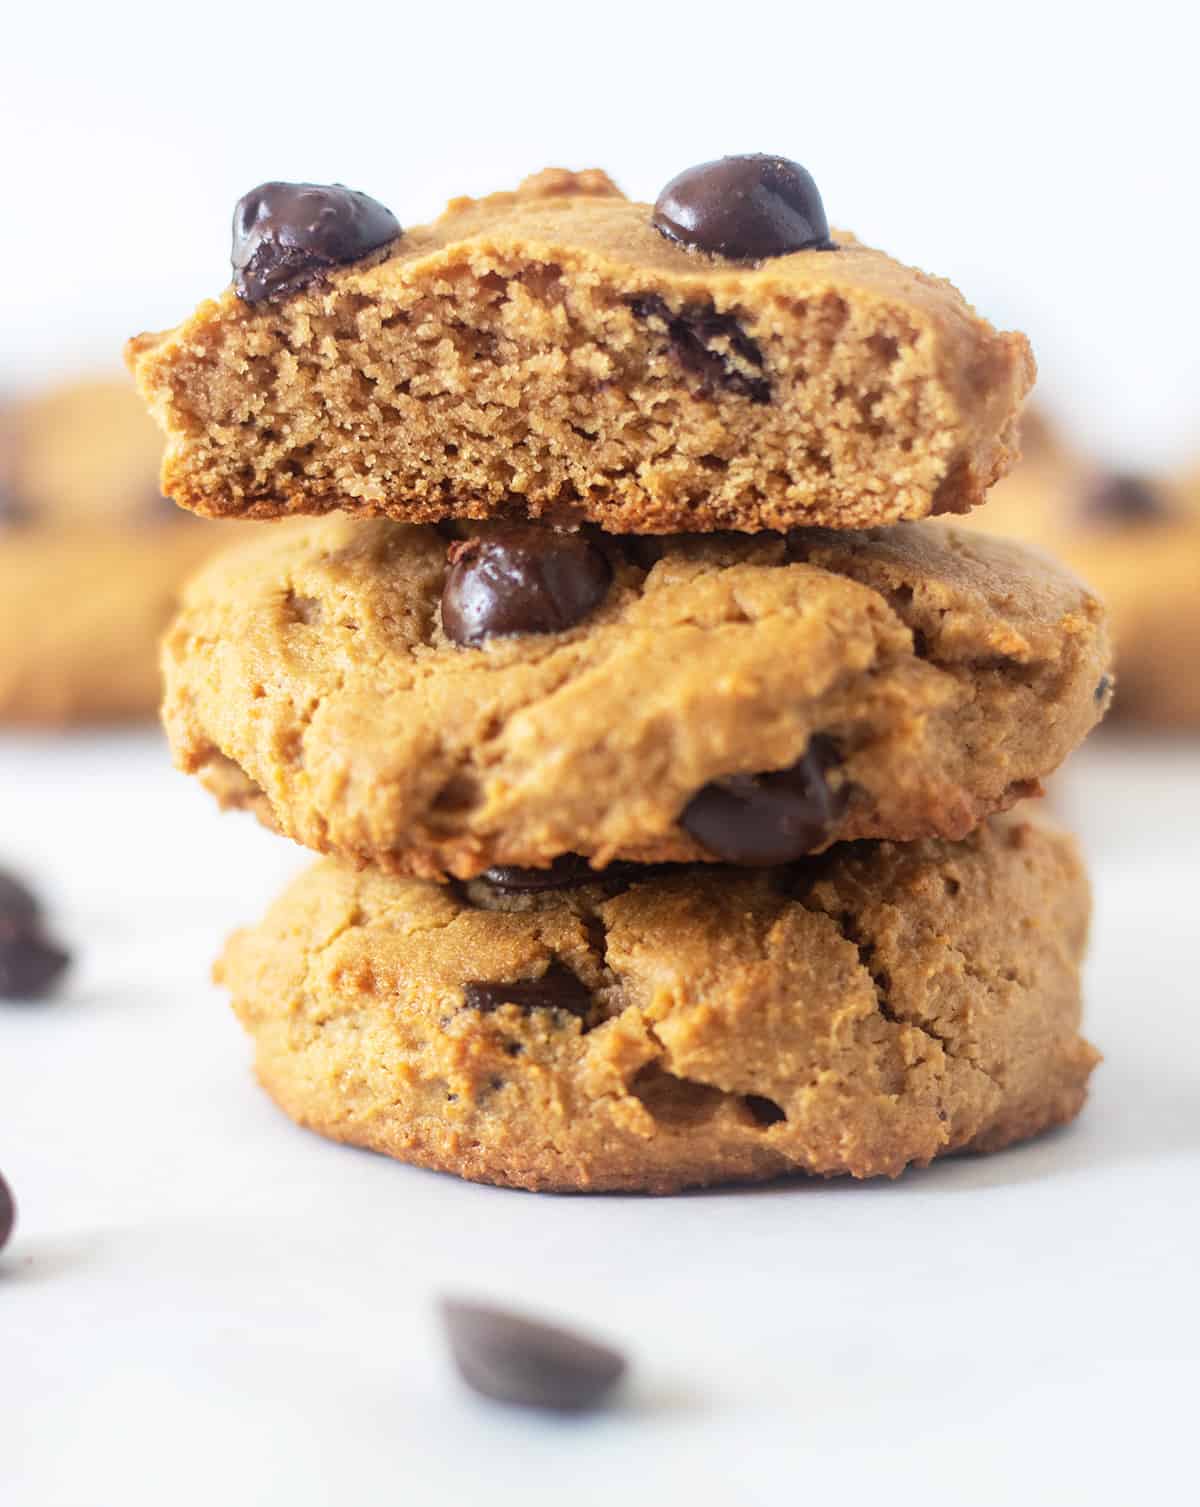 coconut flour chocolate chip cookies stacked on top of each other with the one on top cut in half.